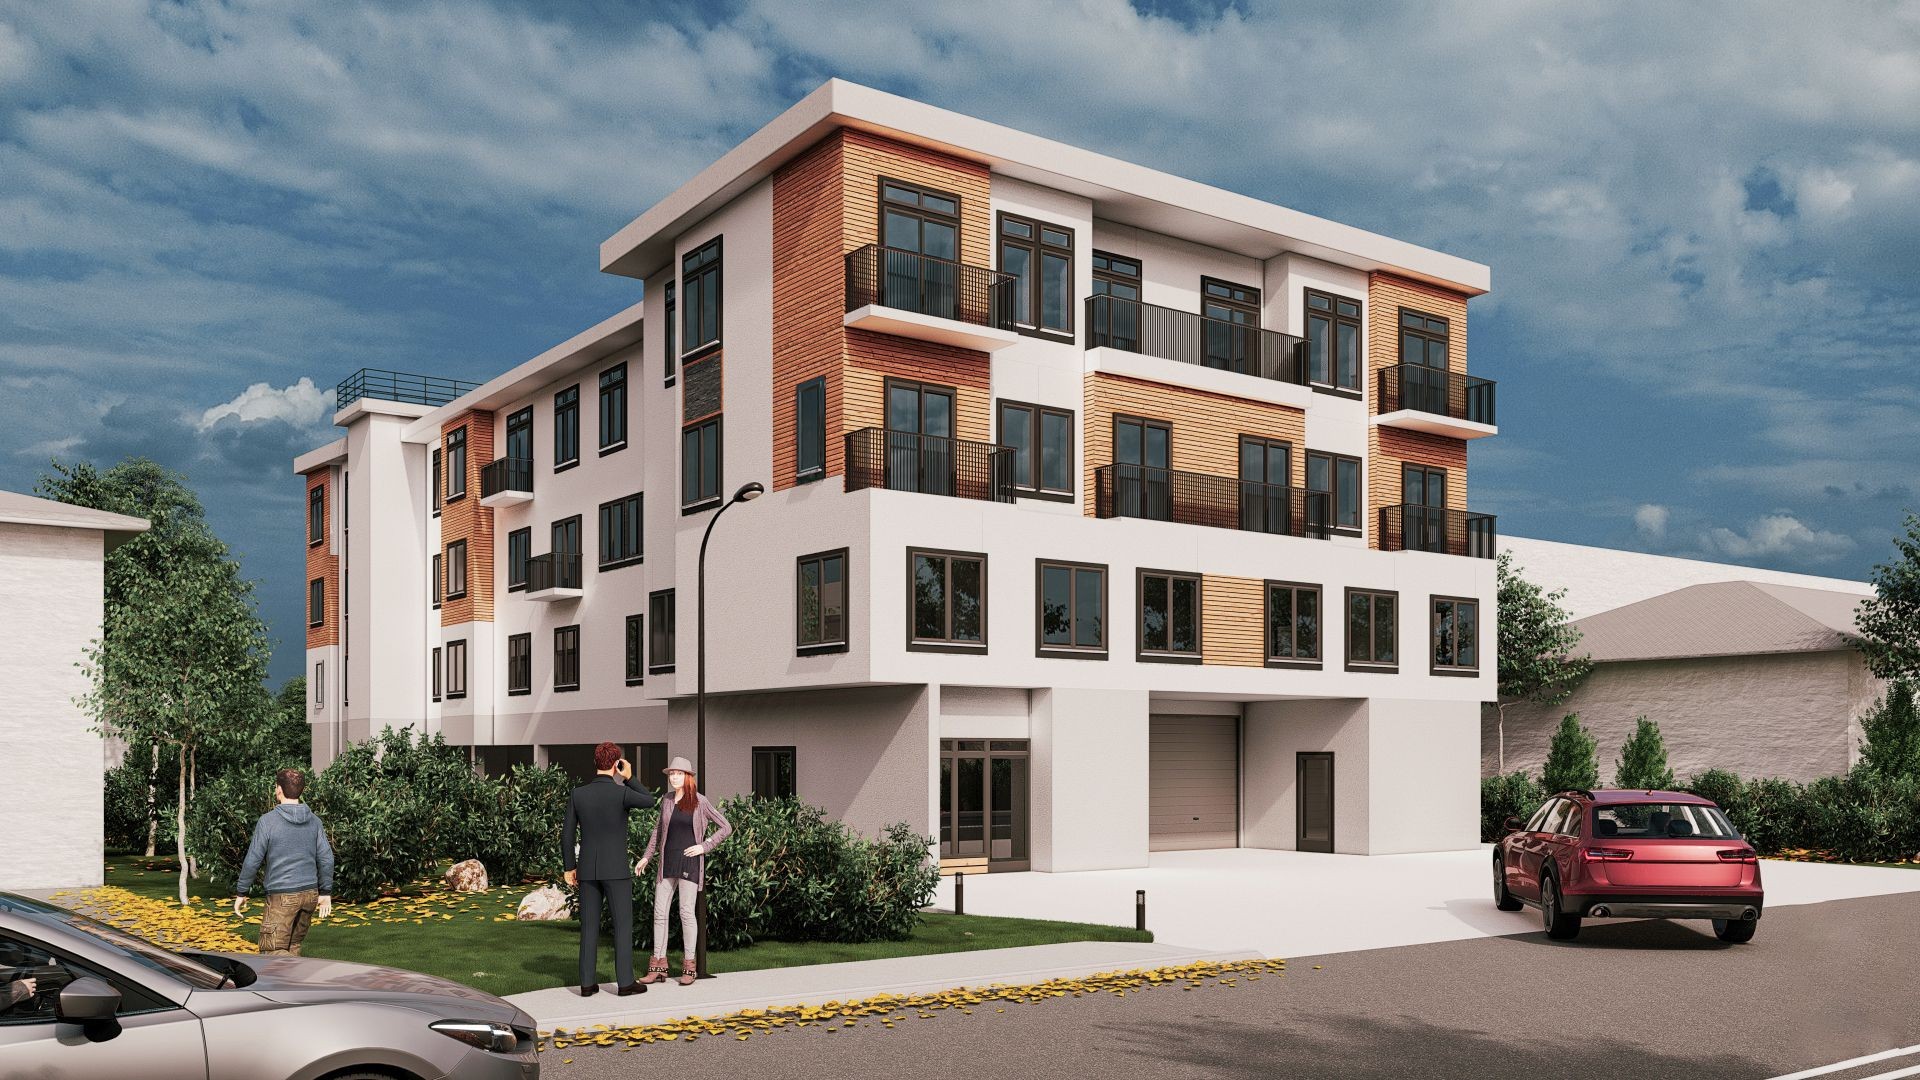 Architectural visualization of Northeast 60th Luxe, showcasing the contemporary energy efficient multi-family residence with stylish wood paneling accents, designed for sustainable urban living by Luxe Living Homes.